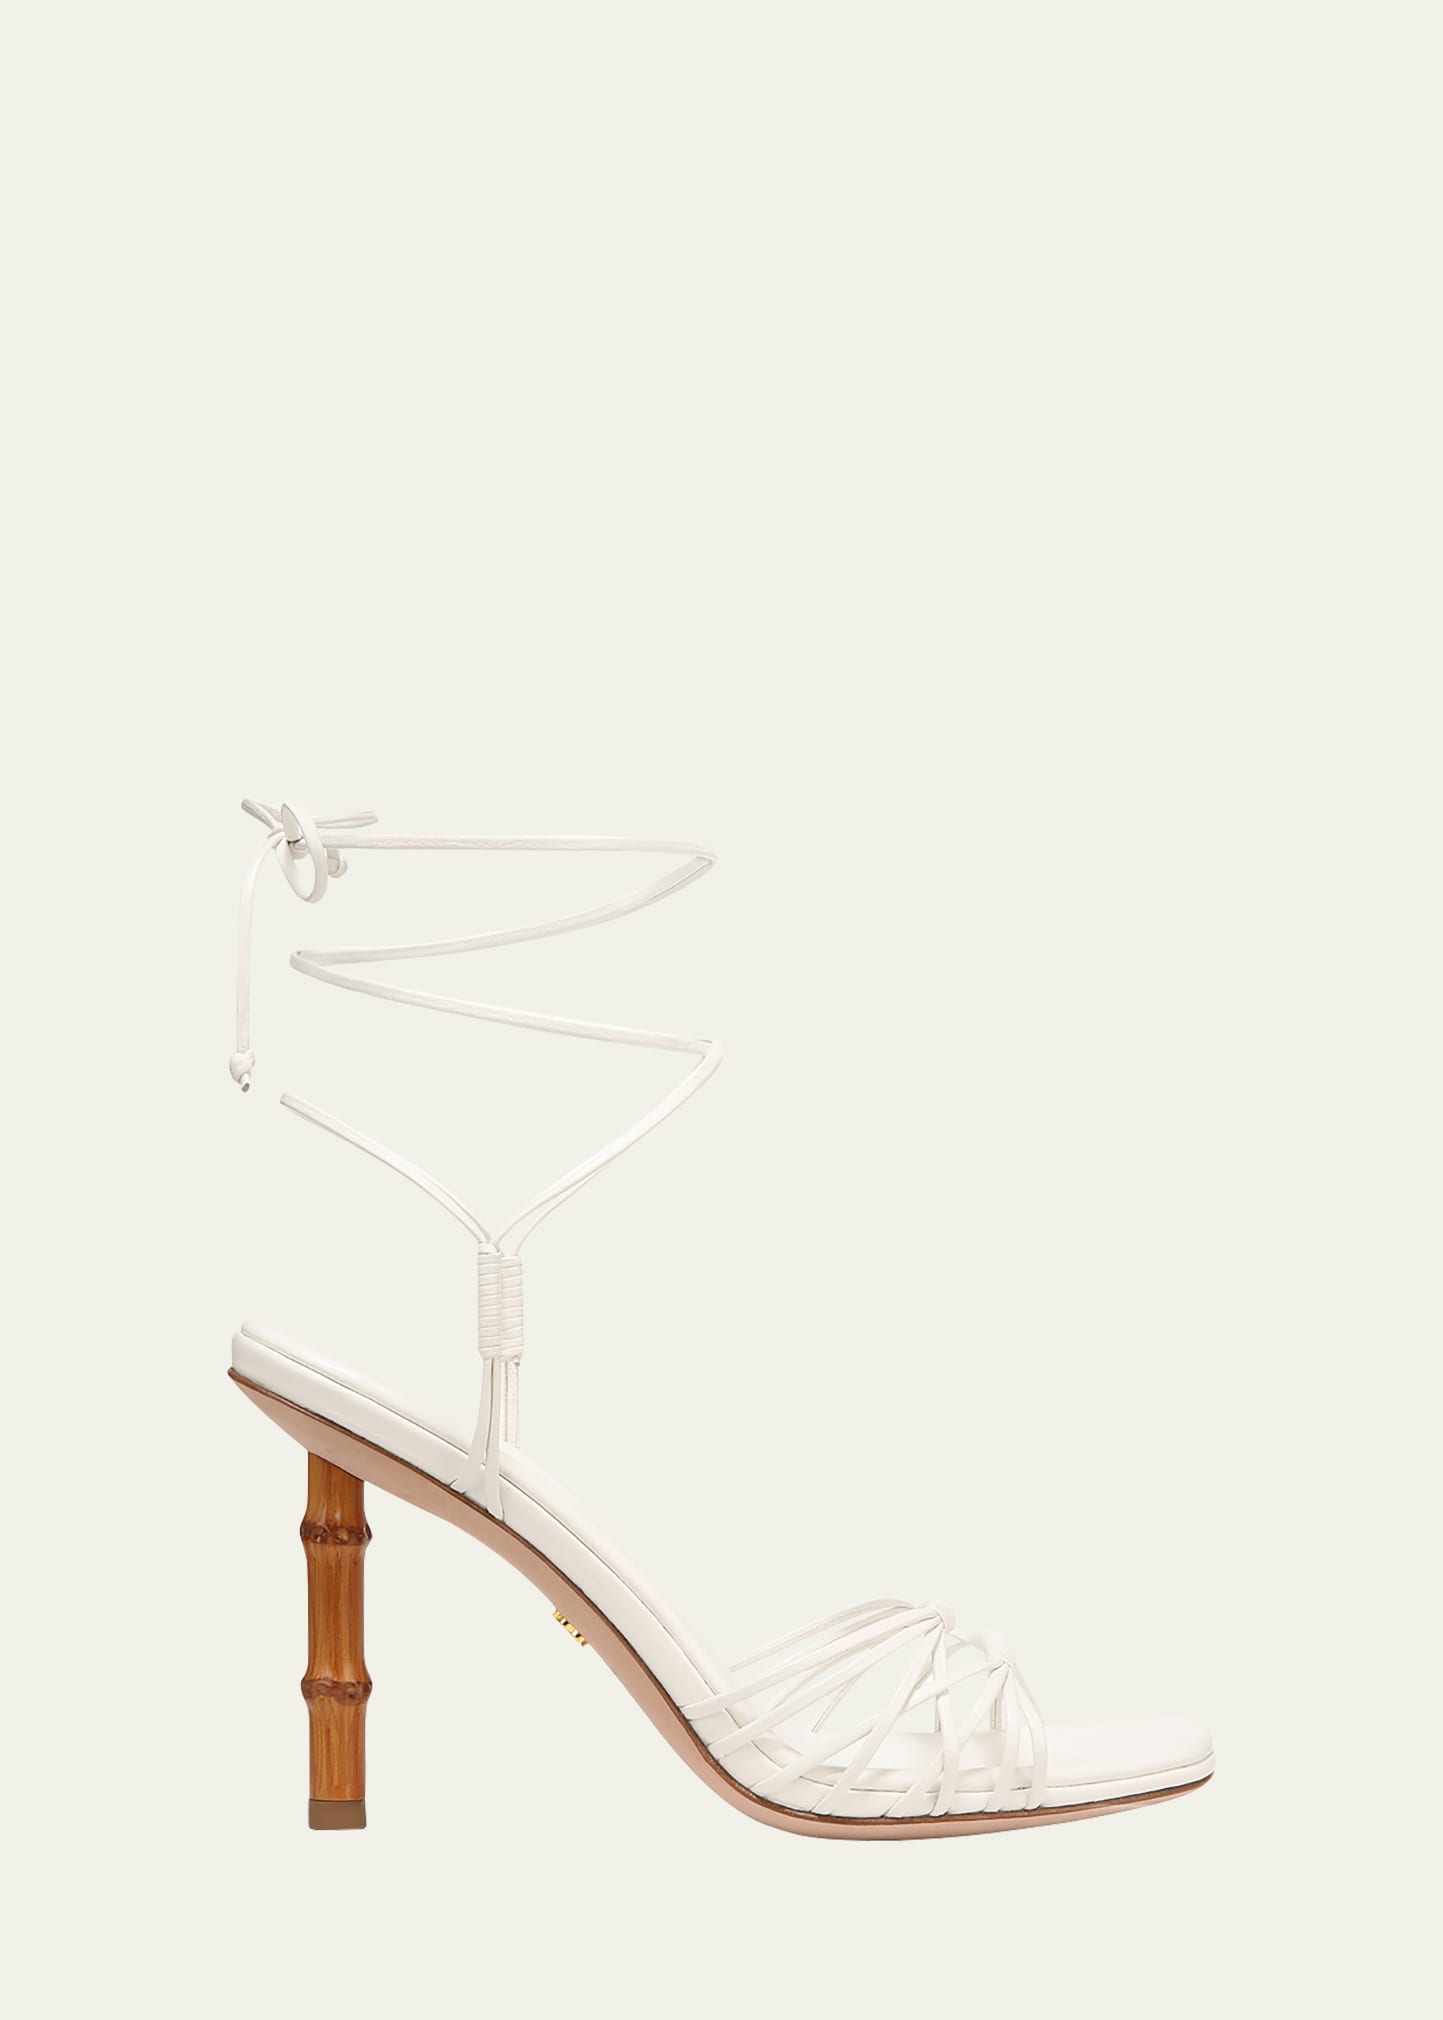 Veronica Beard Cabot Strappy Ankle-wrap Sandals In Coconut White Lea